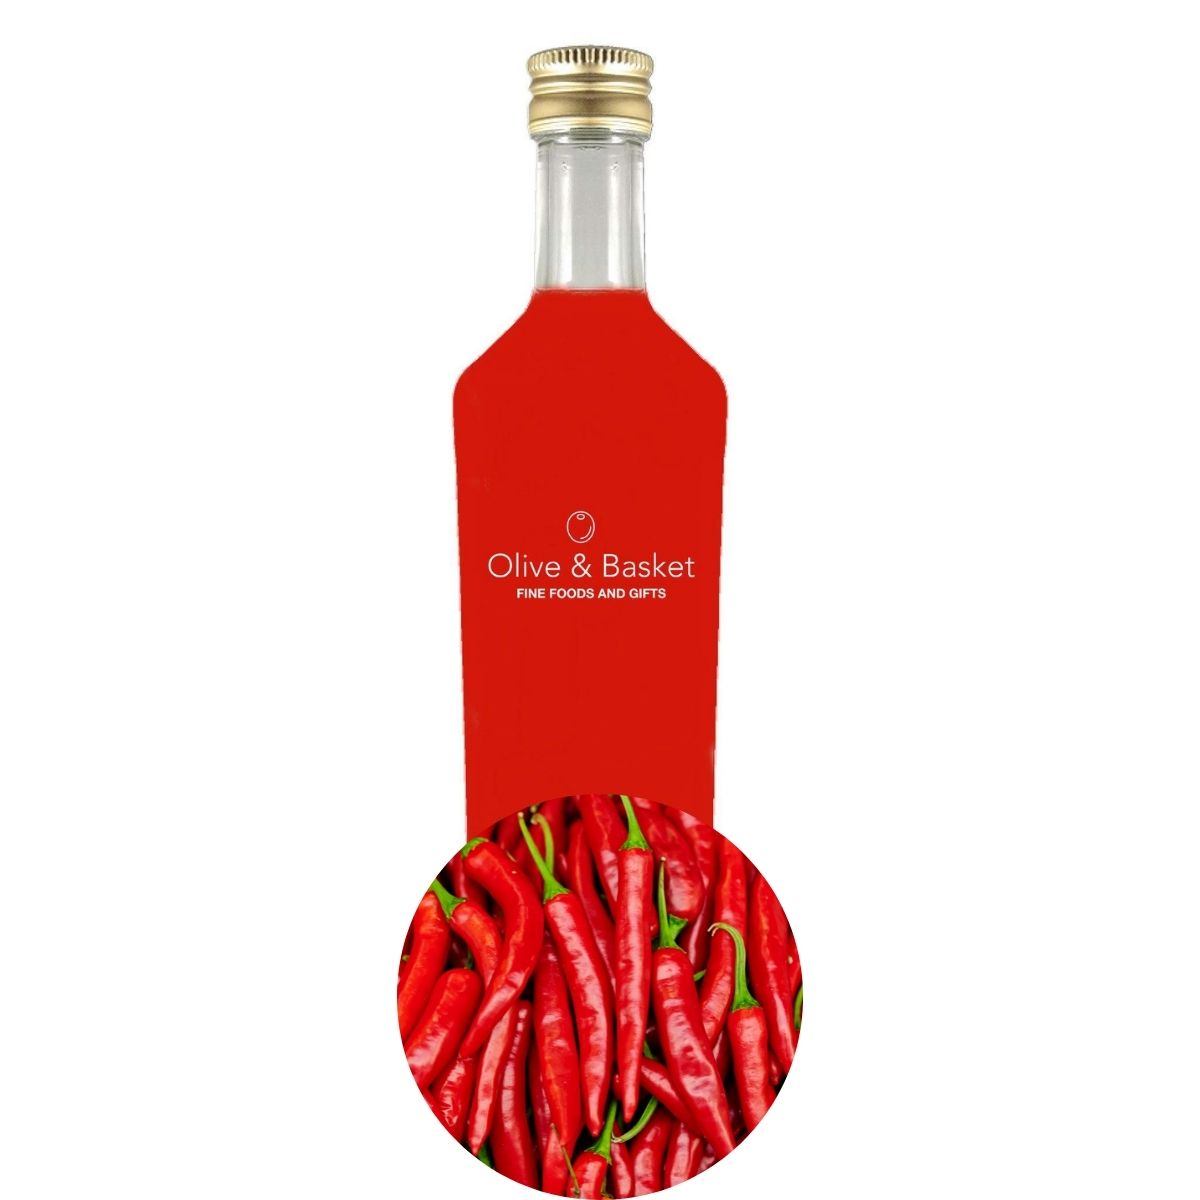 Peperoncino (Chili Pepper) Extra Virgin Olive Oil